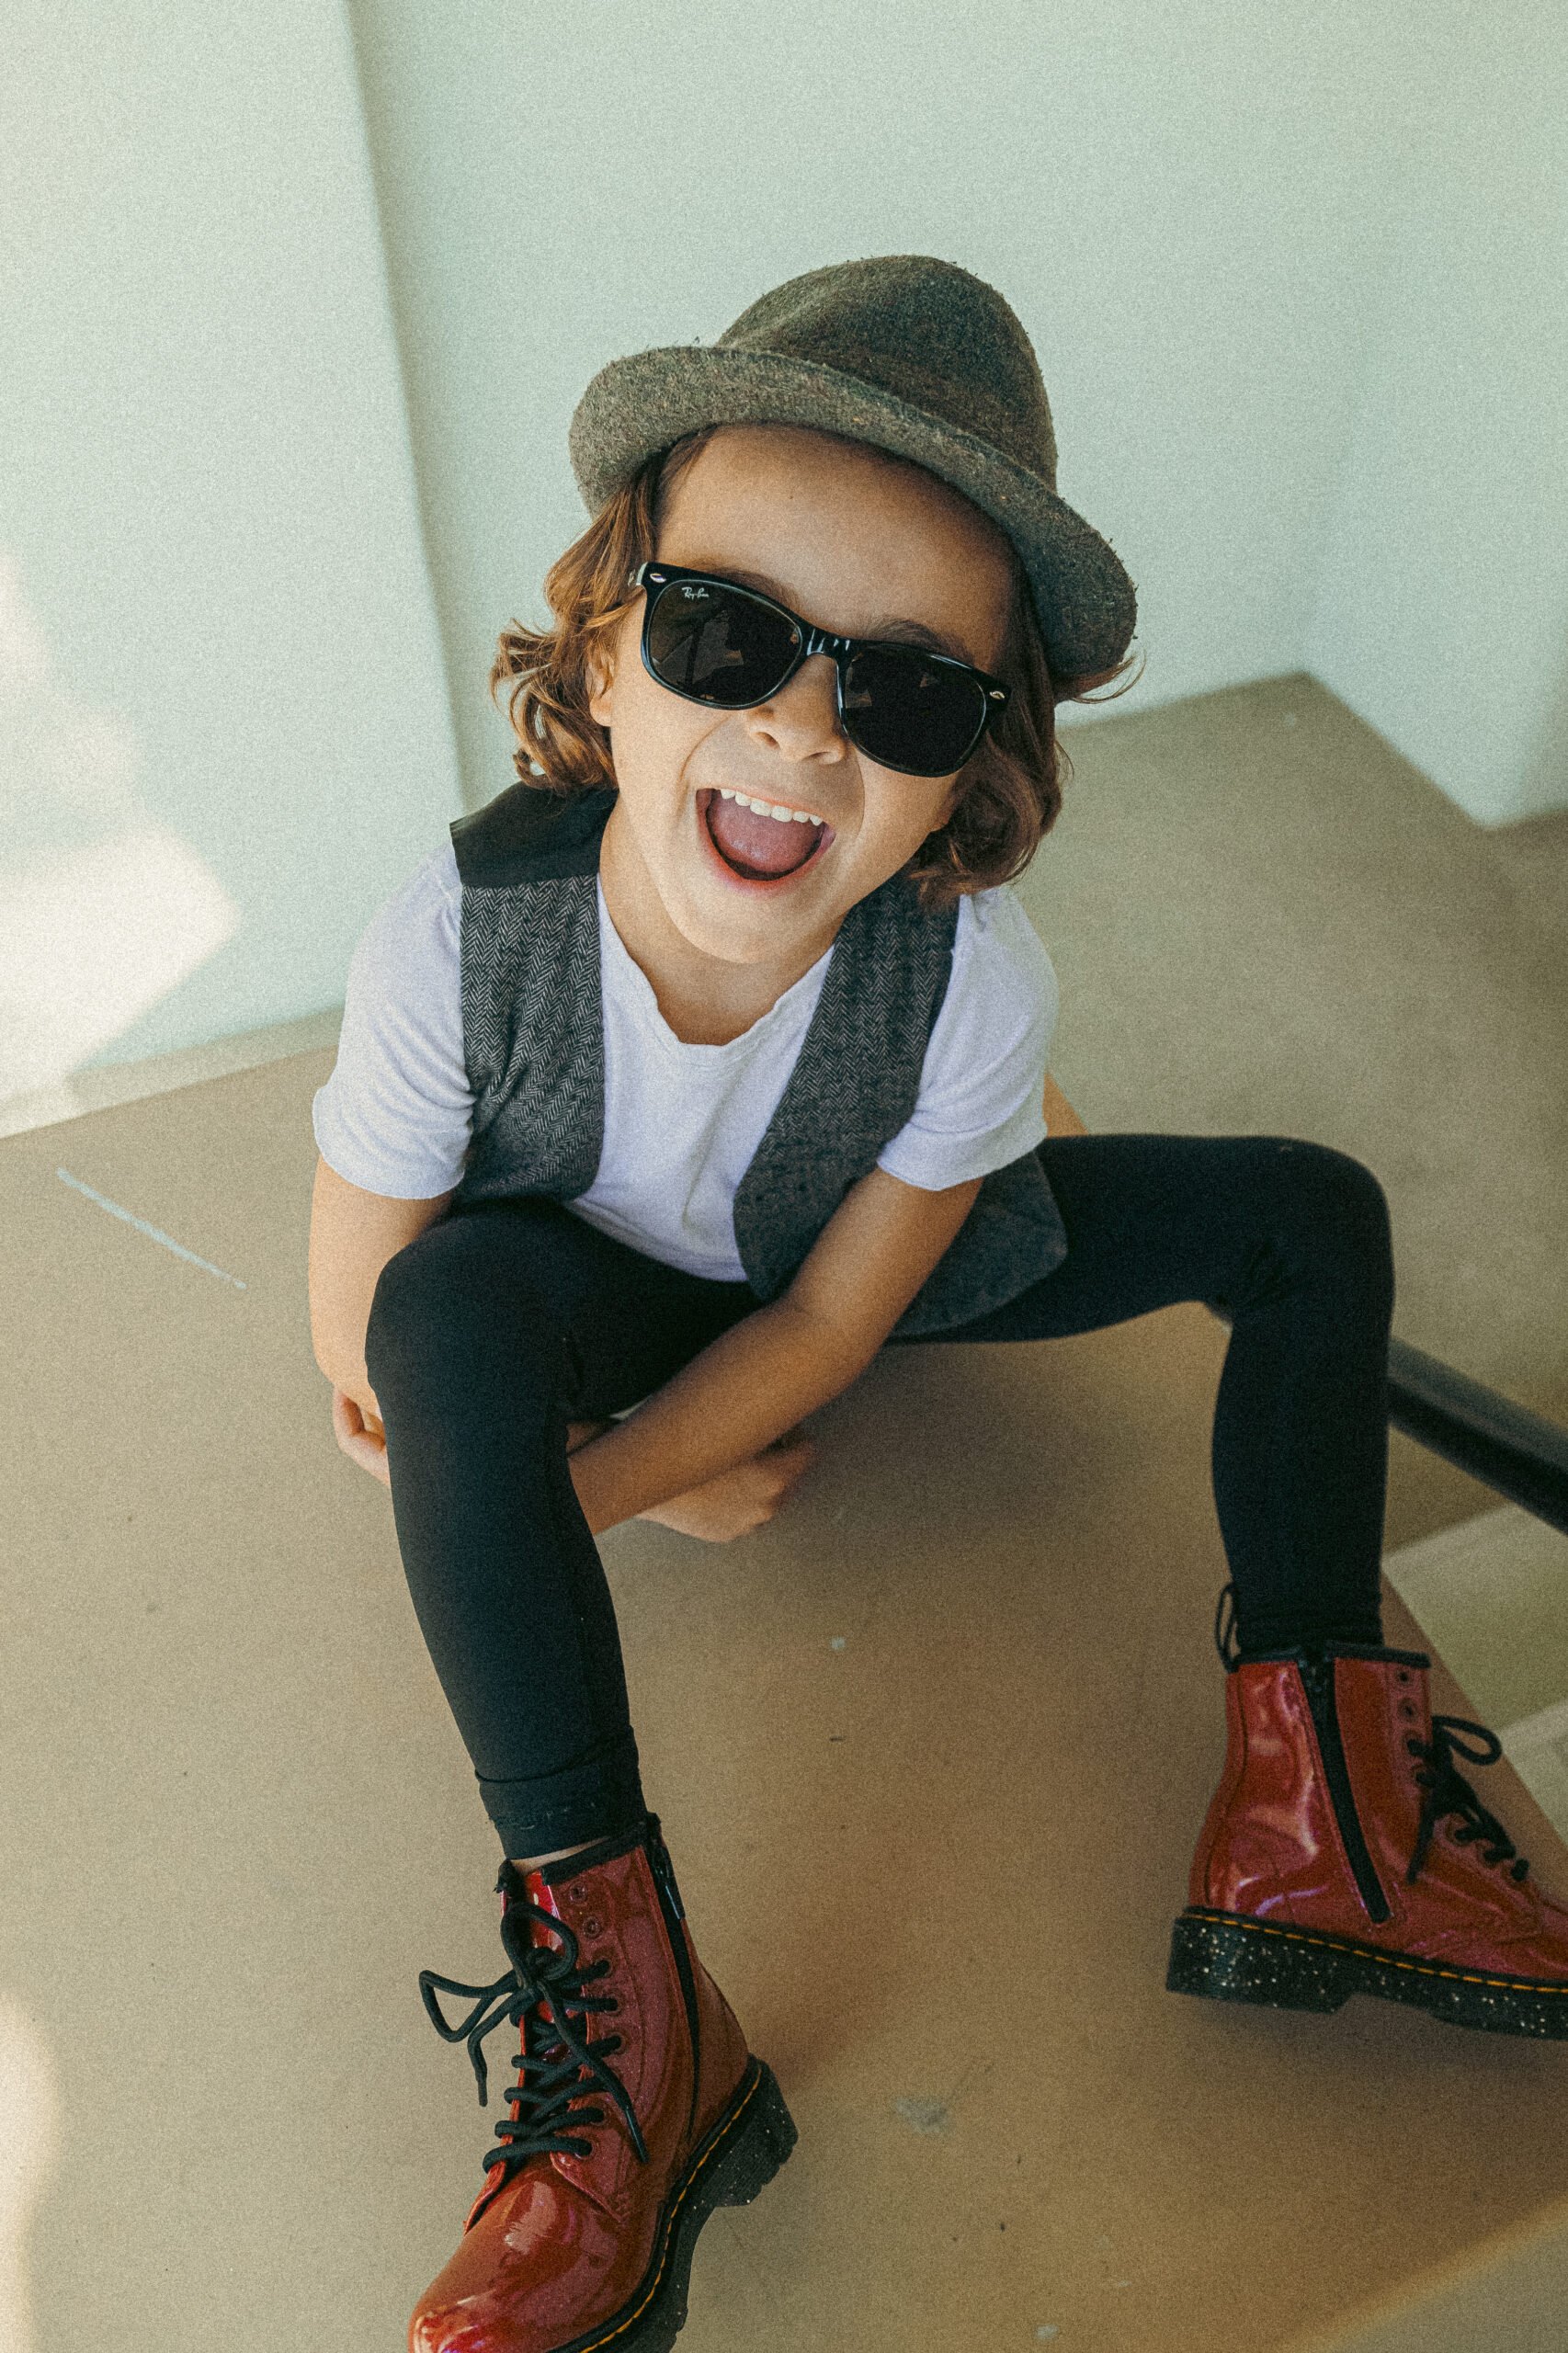 boy laughing with sunglasses on